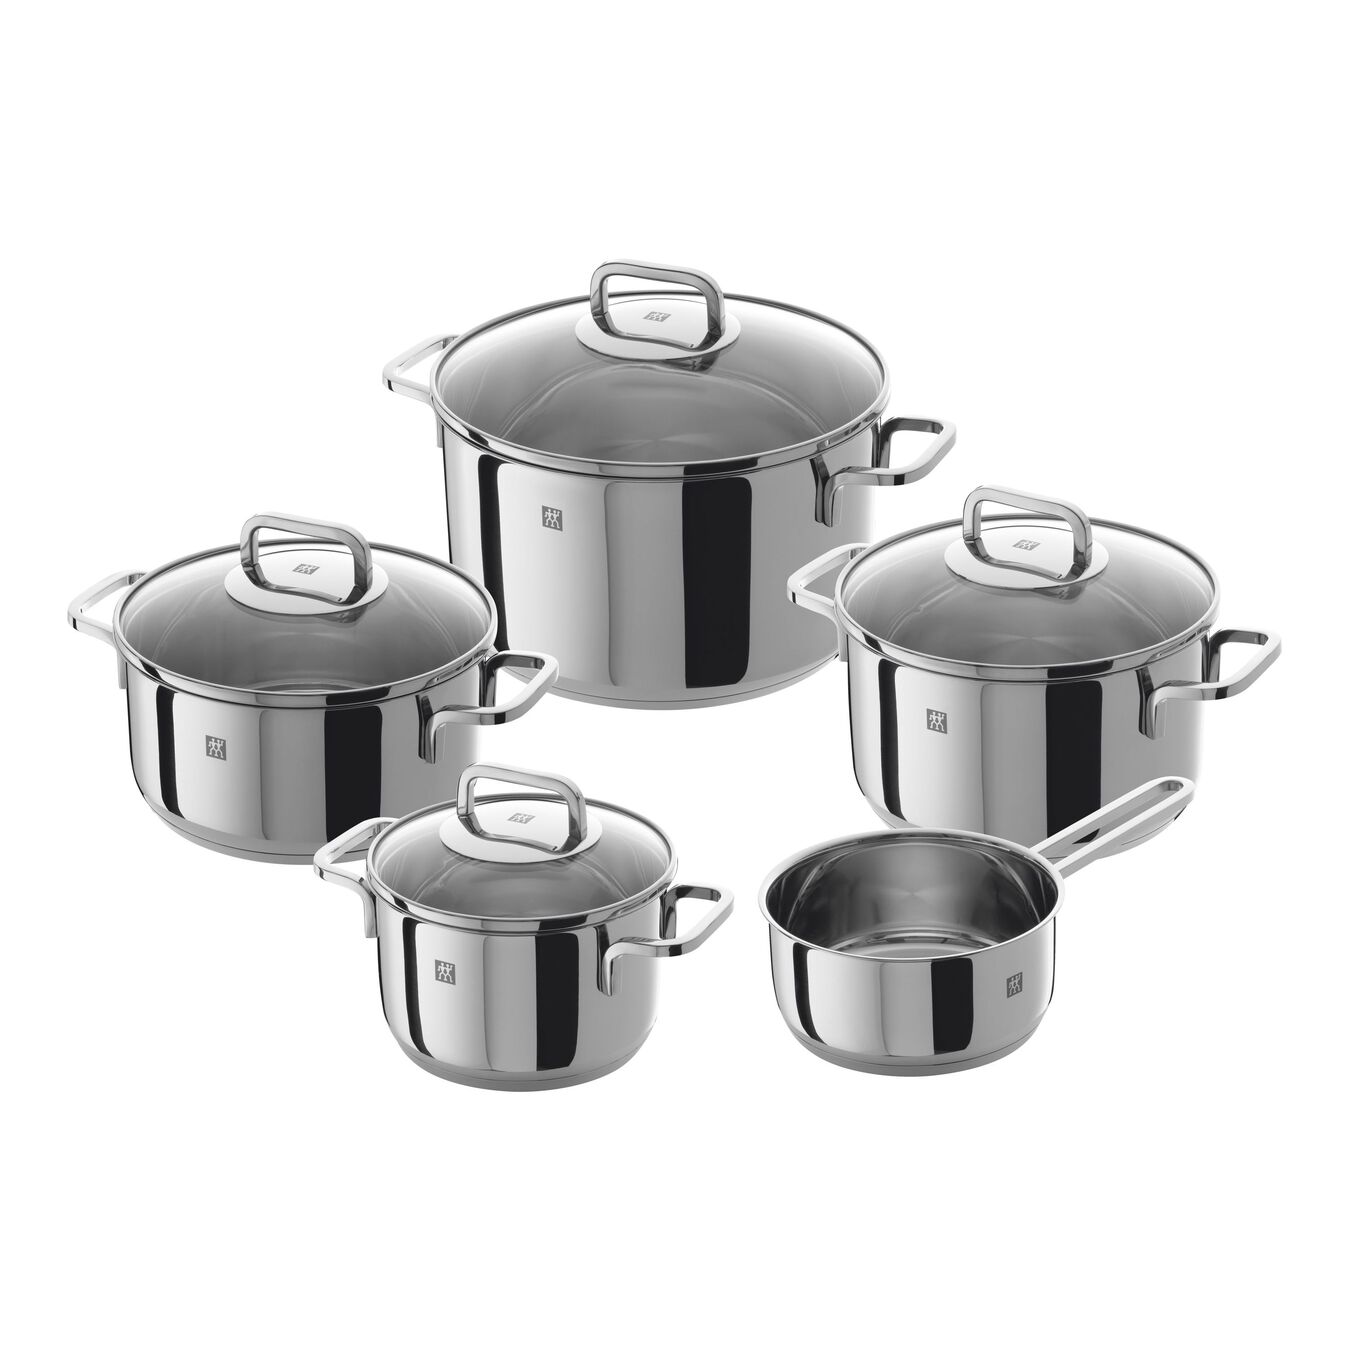 5-pcs 18/10 Stainless Steel Pot set silver,,large 1